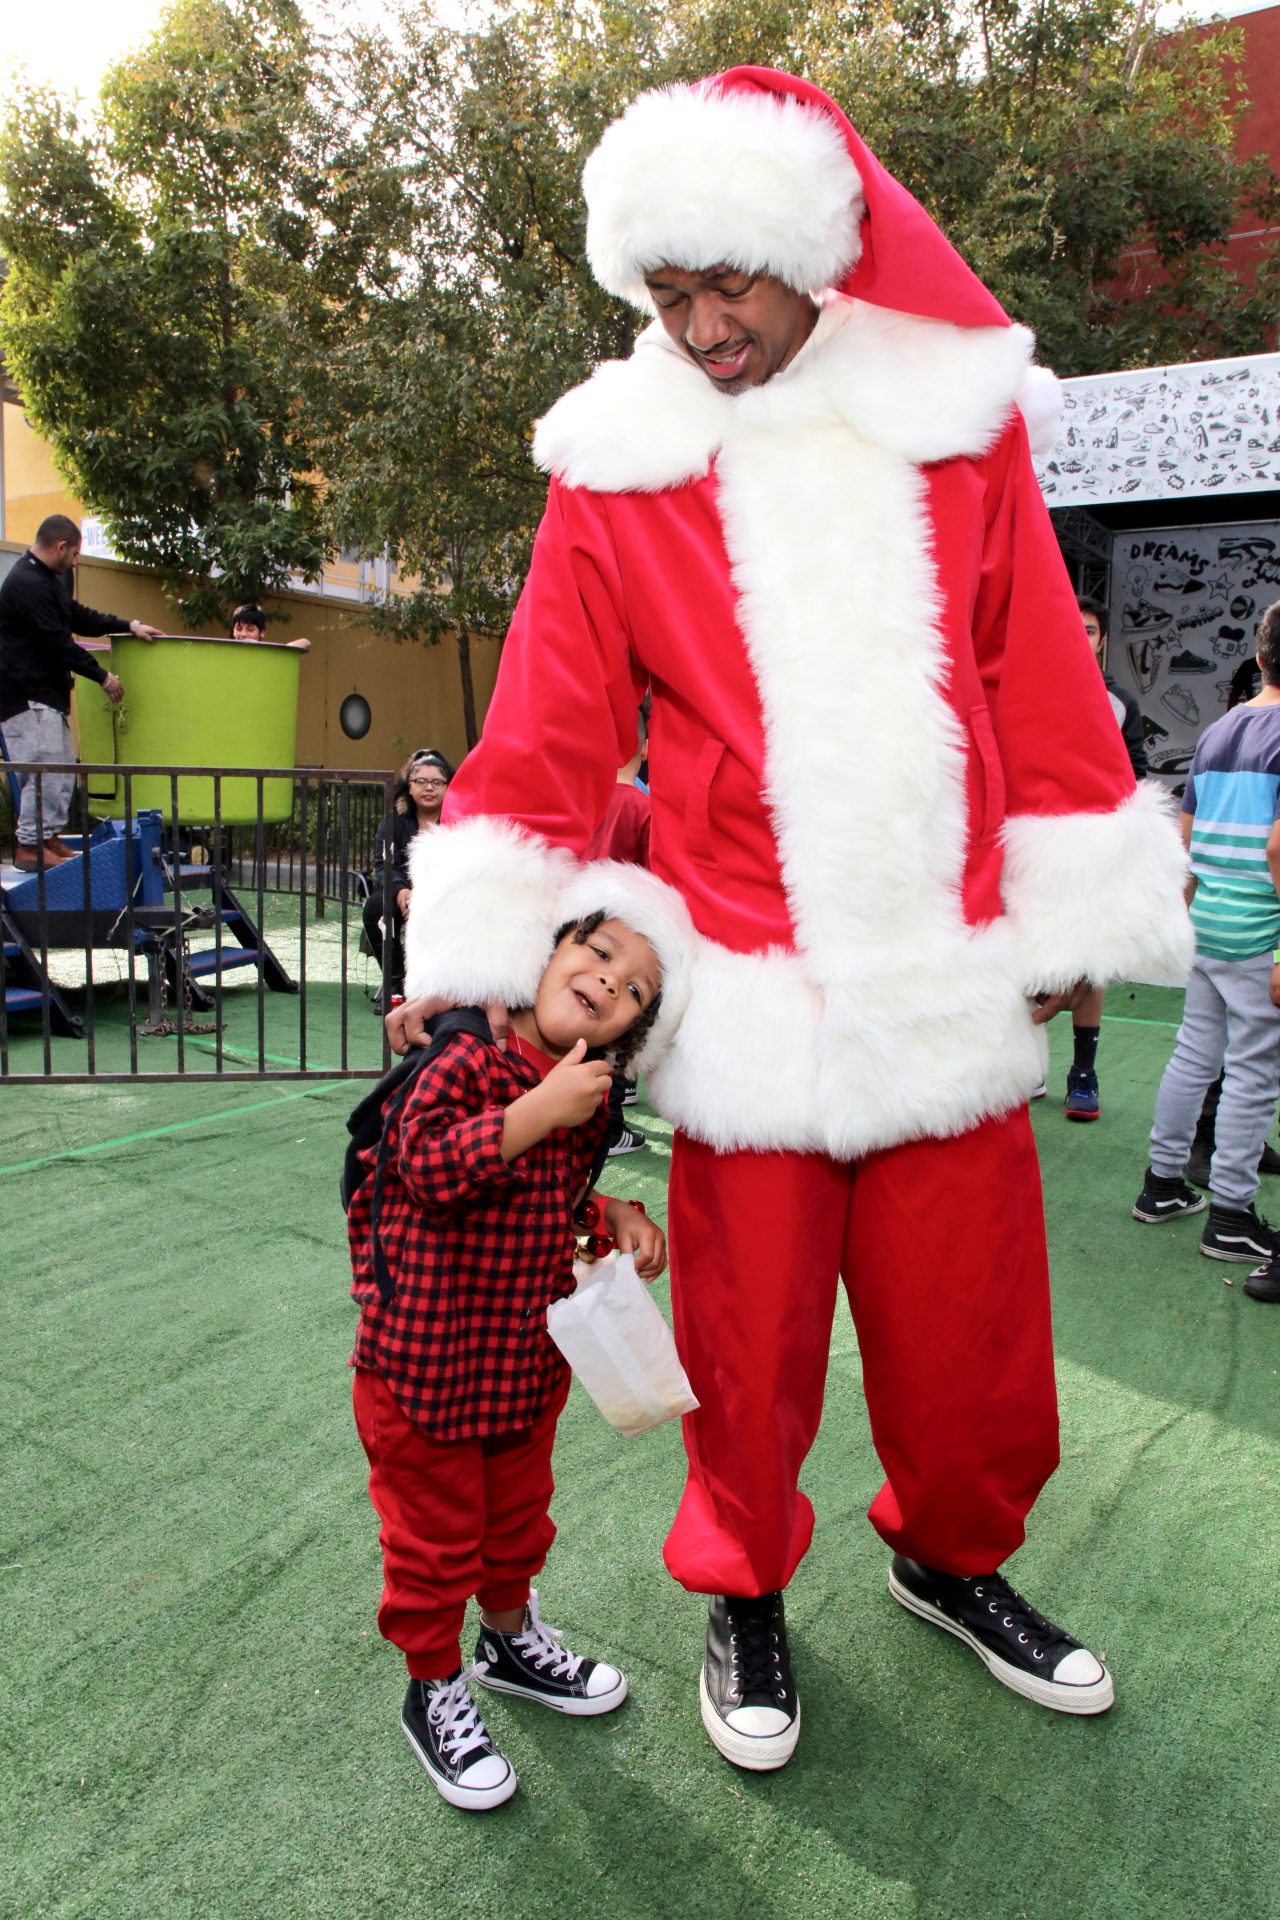 From family photos in matching pajamas to visits to see Santa, Nick is working overtime